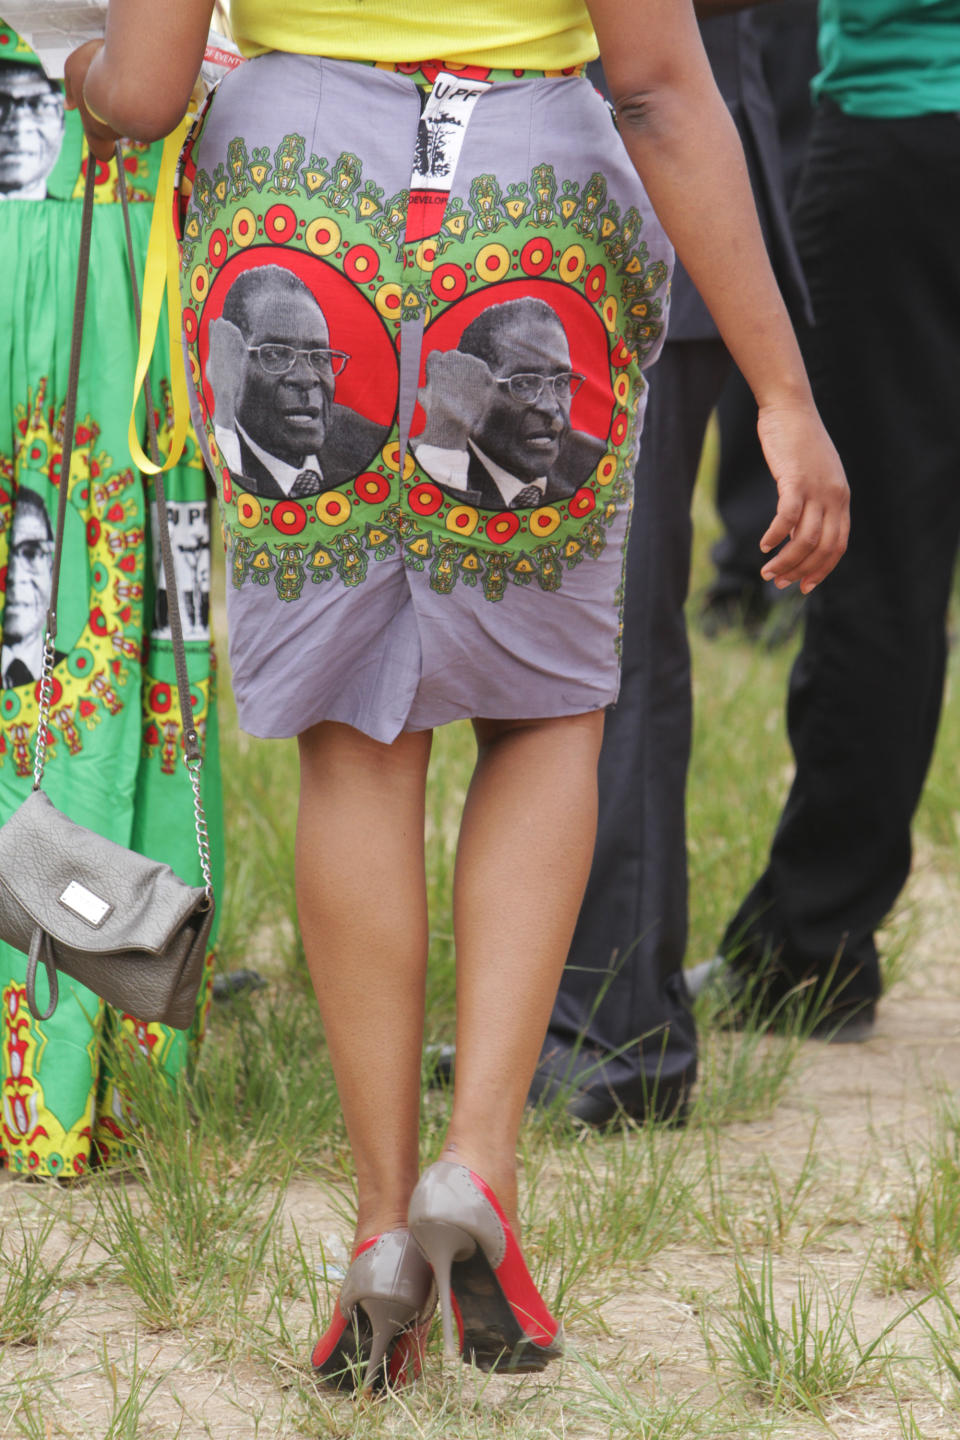 A supporter of Zimbabwean President Robert Mugabe wears a dress with his portrait during celebrations to mark his 90th birthday in Marondera about 100 km east of Harare, Sunday, Feb. 23, 2014. Mugabe who is Africas oldest leader has been in power in the Southern African nation since 1980. (AP (AP Photo/Tsvangirayi Mukwazhi)